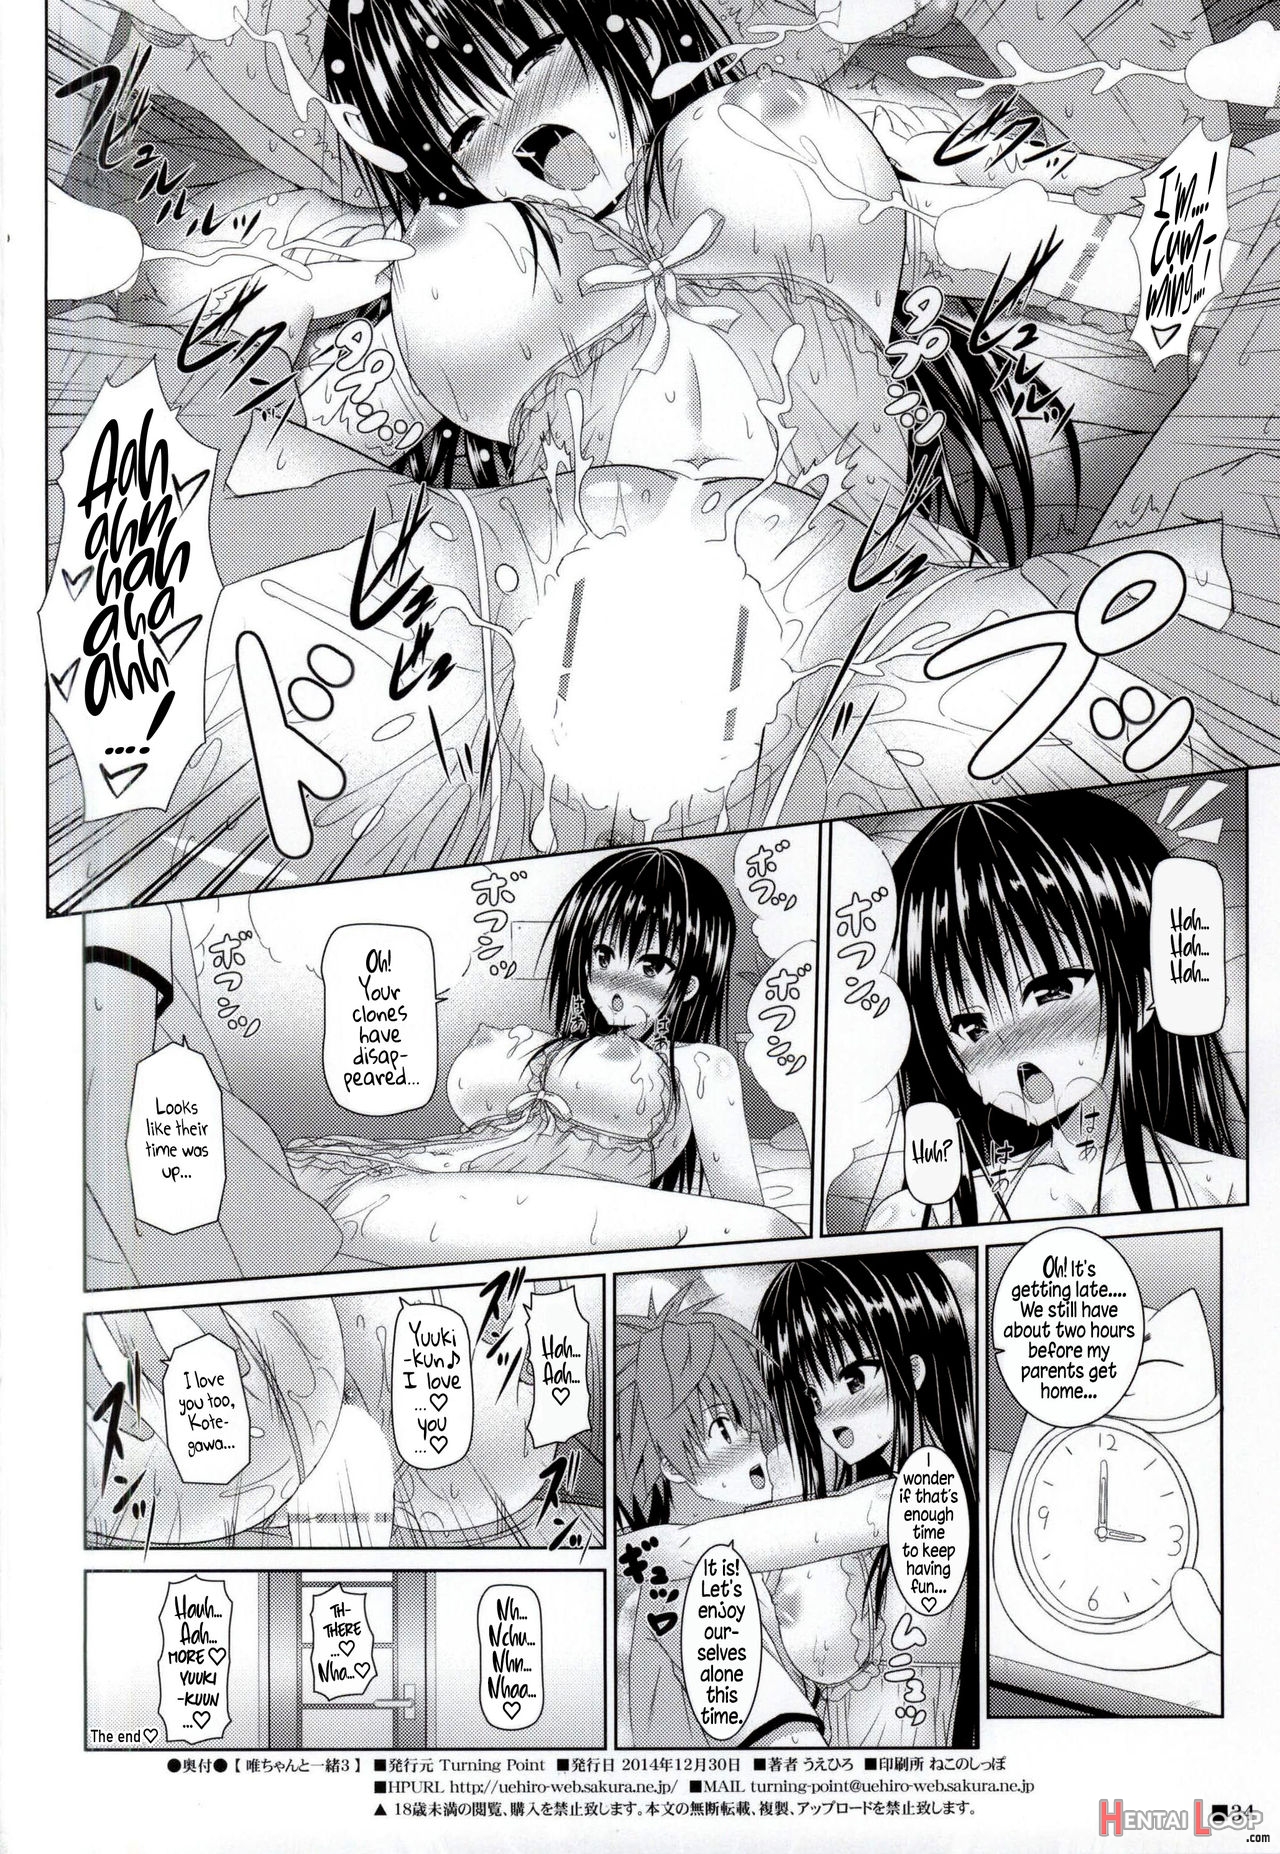 Together With Yui 3 page 34